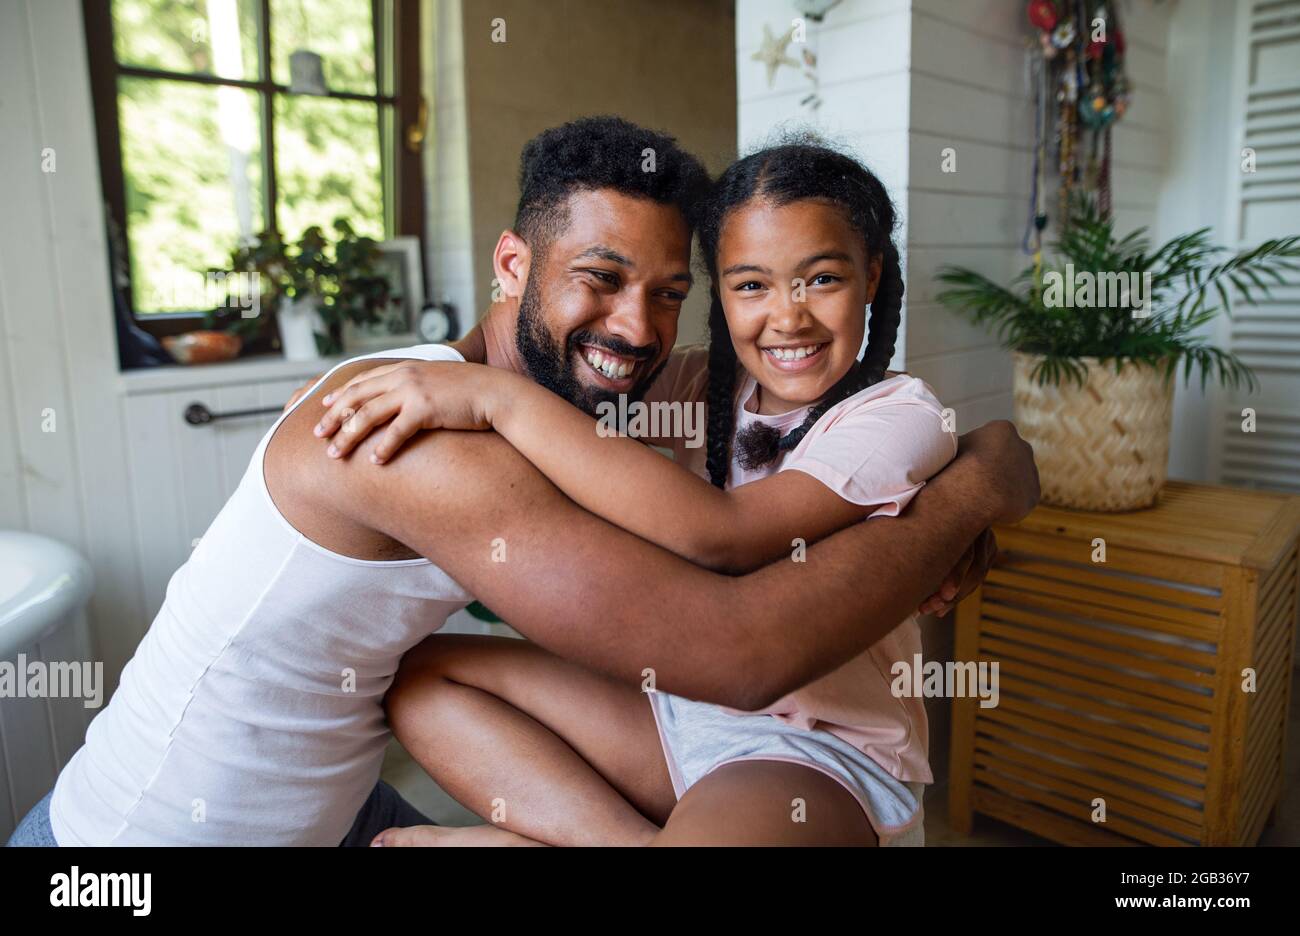 Happy young man with small sister indoors at home, hugging. Stock Photo